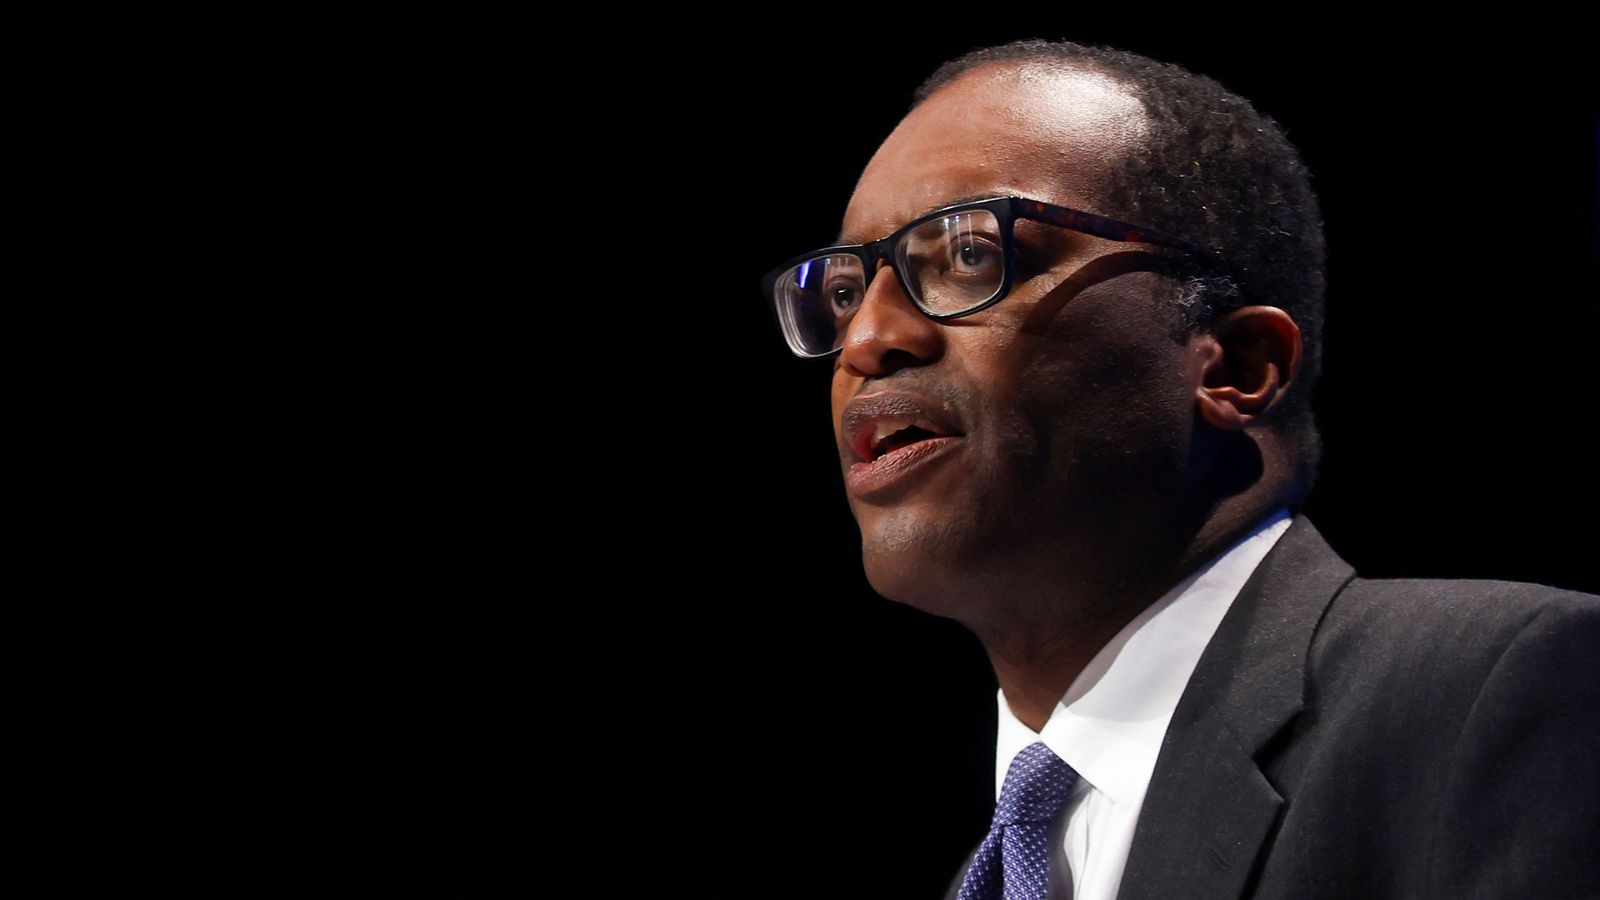 Chancellor Kwasi Kwarteng insists he is 'not going anywhere' and is 'totally focused' on growth plan